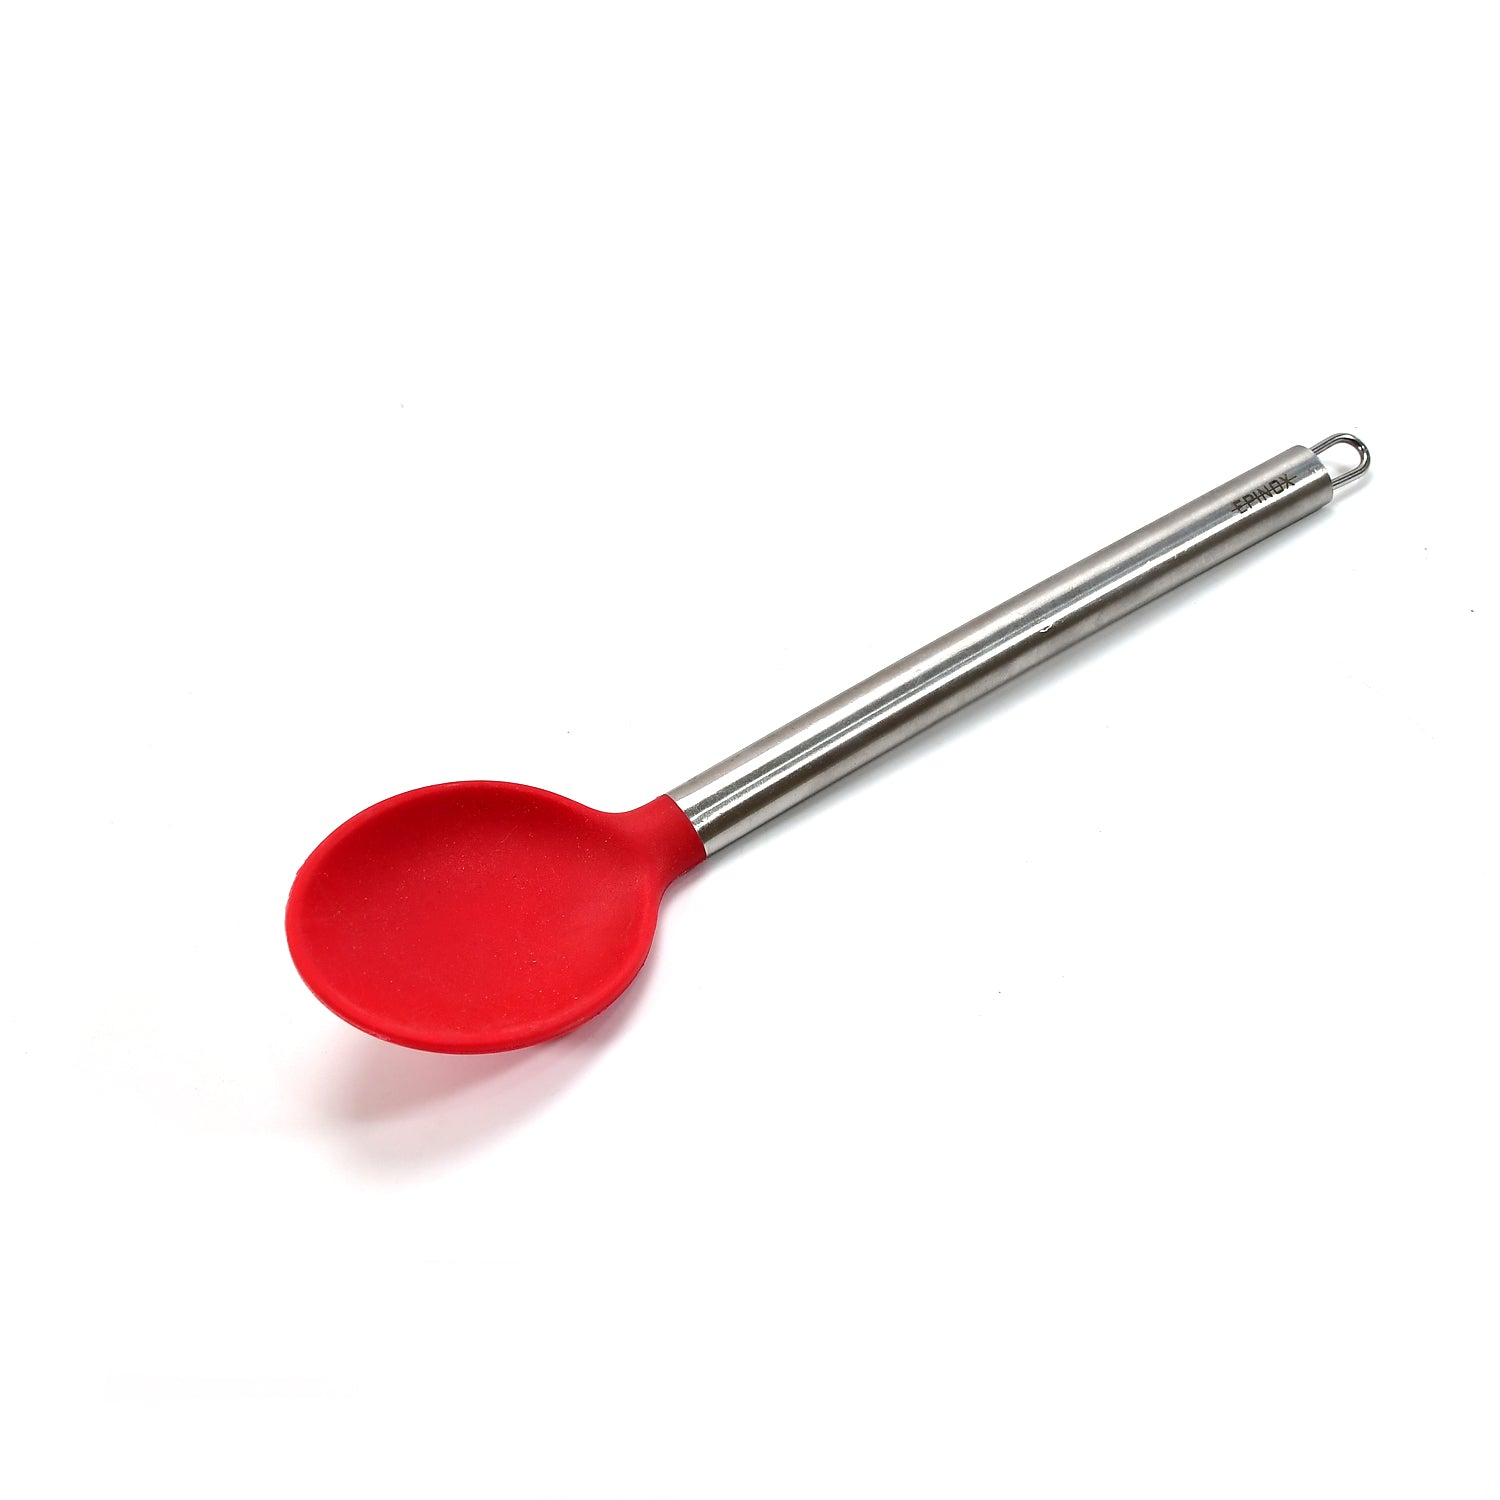 2899 Silicone Serving Spoon with Heat Resistant Silicone Covering Head and Stay-Cool Stainless Steel Handle DeoDap